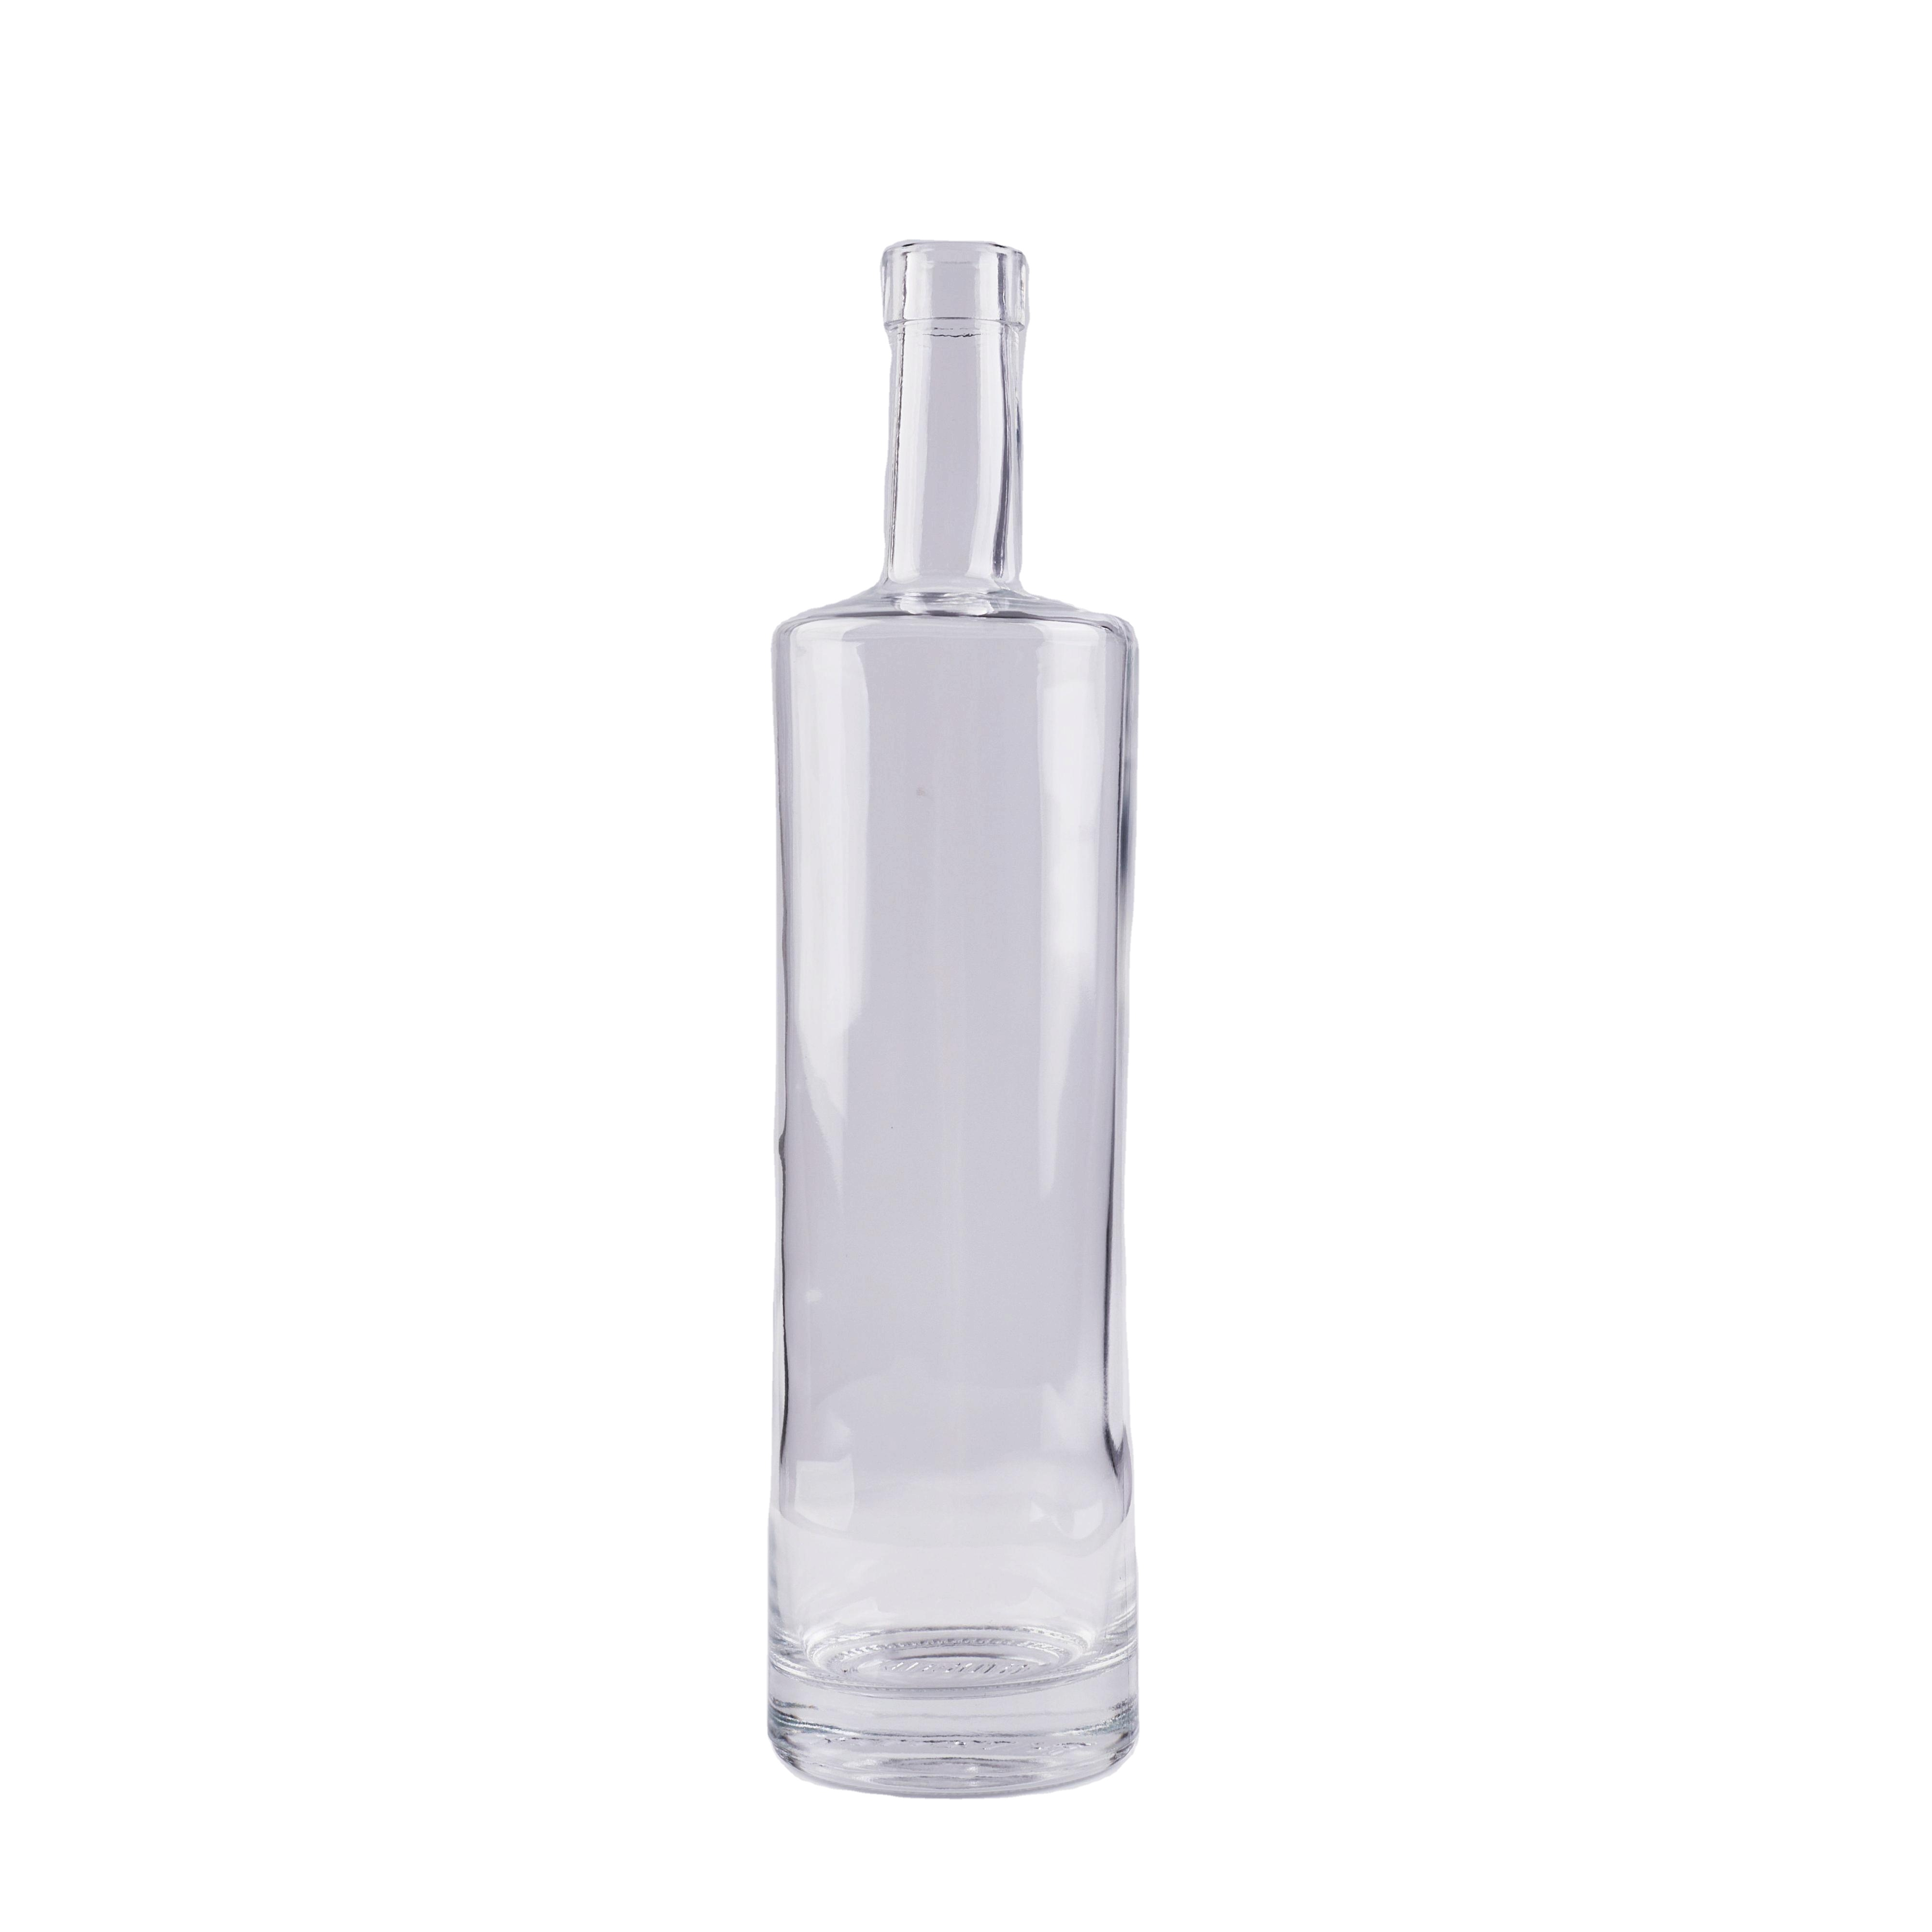 Wholesale in stock Round long neck empty liquor Whisky Vodka tequila glass bottle with cork cap